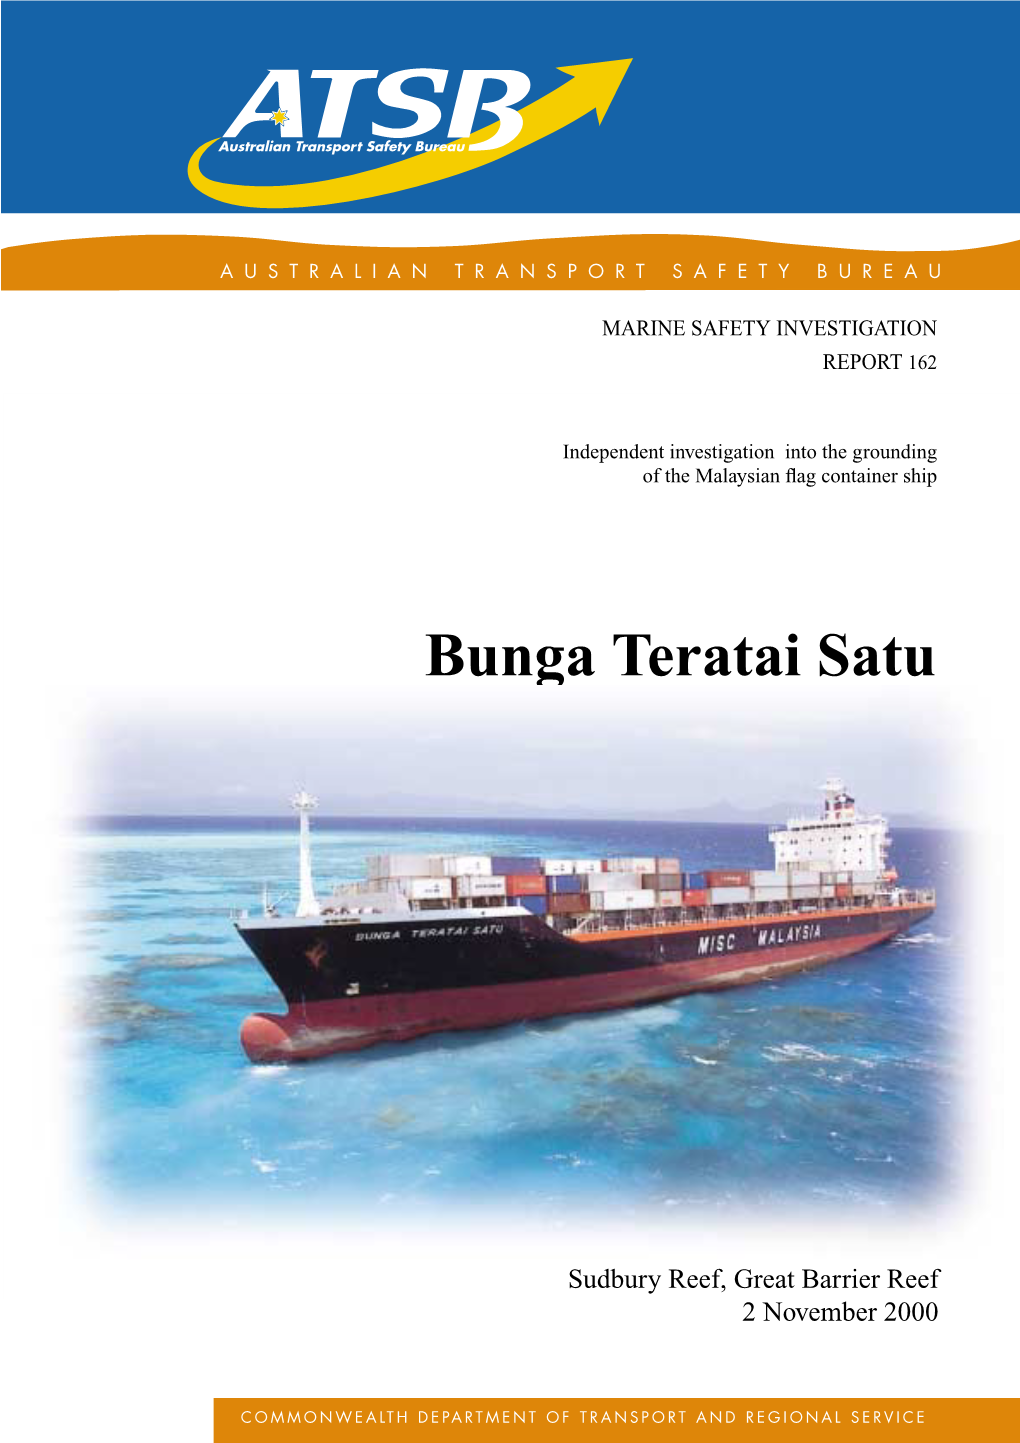 Investigation Into the Grounding of the Malaysian Flag Container Ship Bunga Teratai Satu on Sudbury Reef, Great Barrier Reef on 2 November 2000